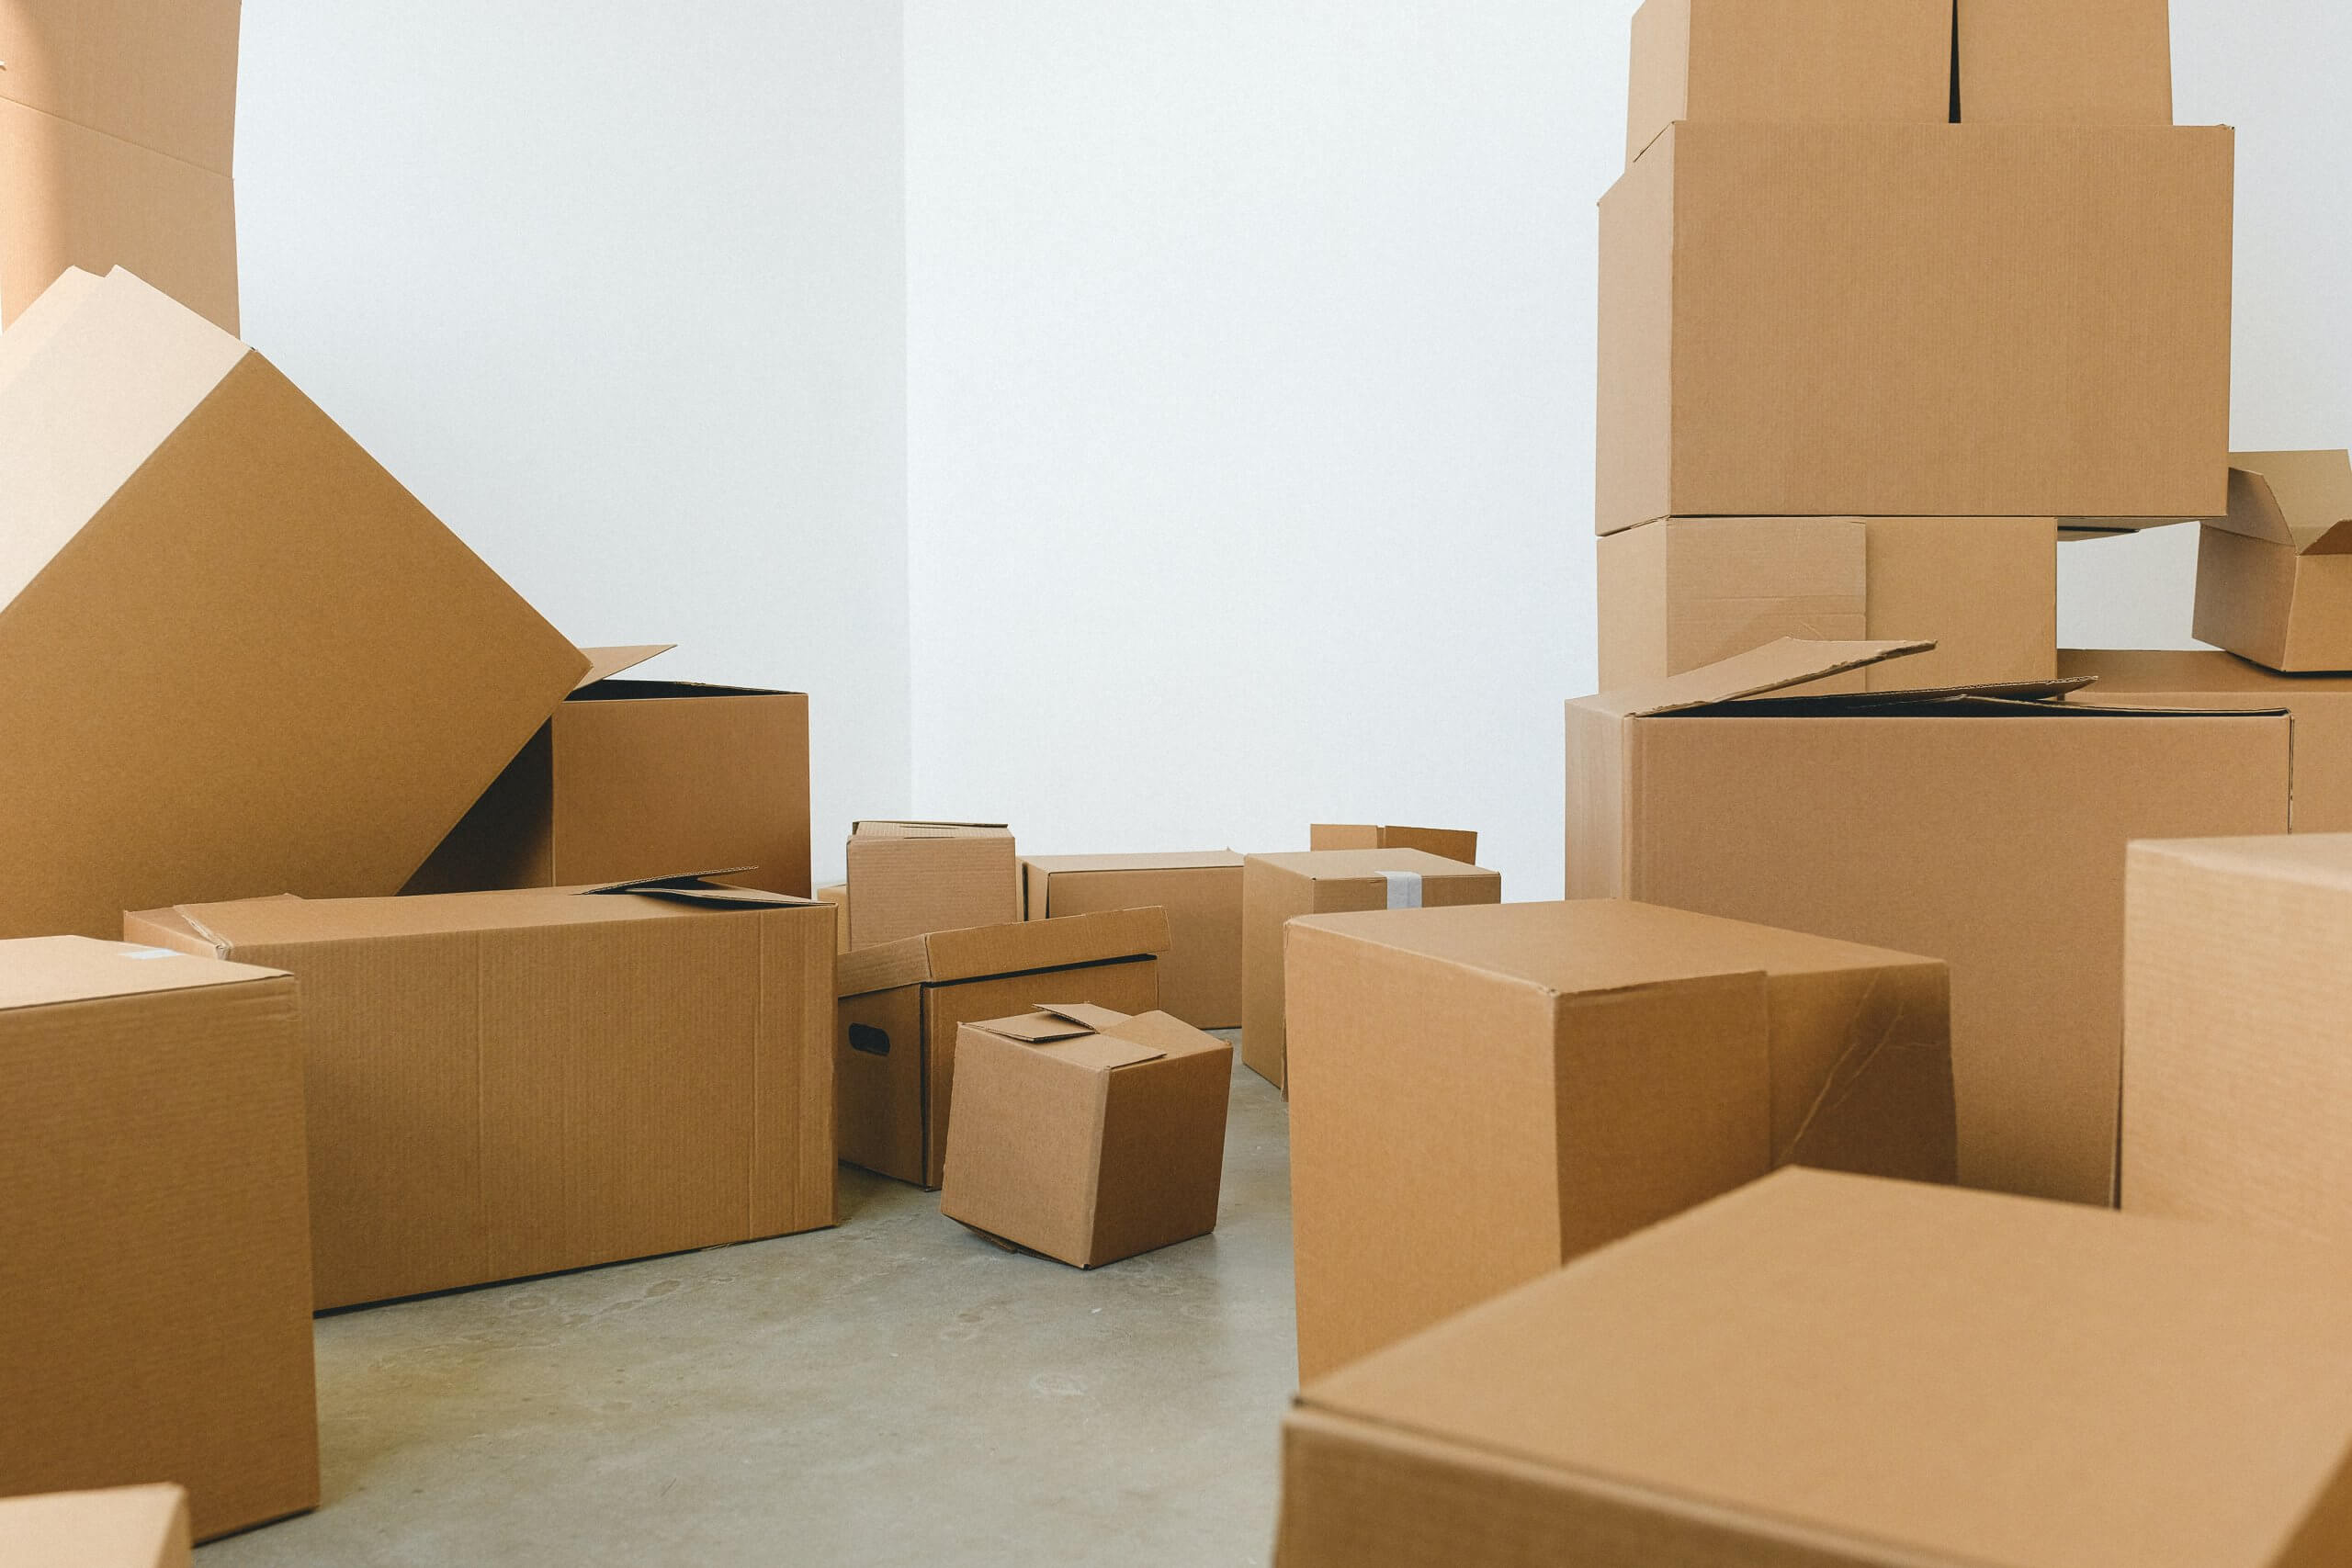 Top 10 Tips for Maximizing Space in Your Self-Storage Unit